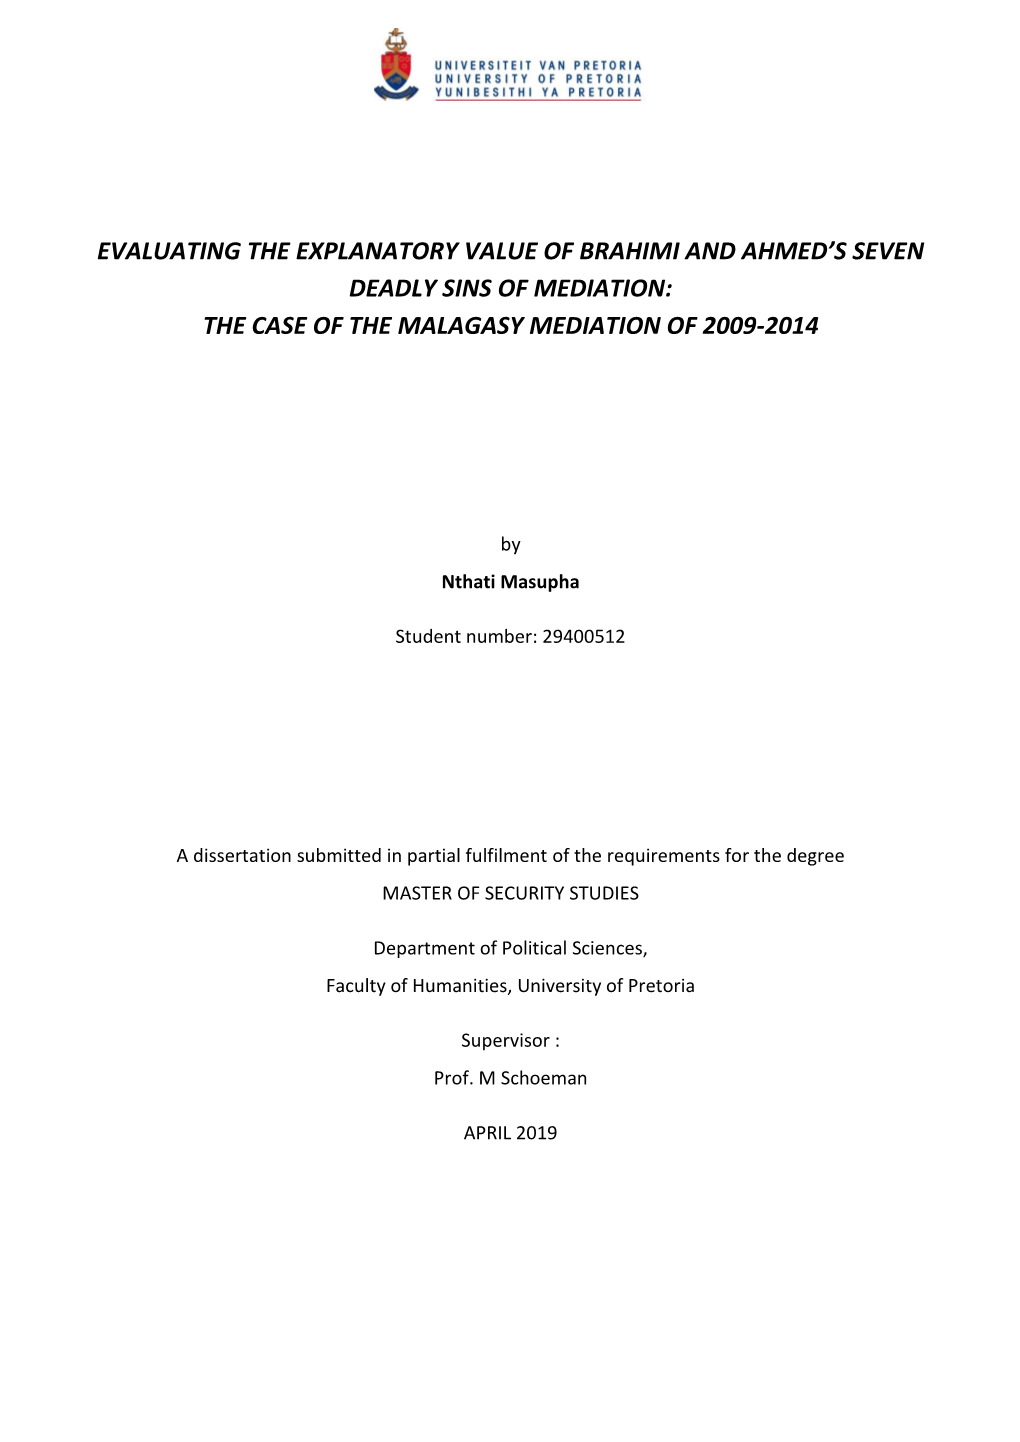 Evaluating the Explanatory Value of Brahimi and Ahmed’S Seven Deadly Sins of Mediation: the Case of the Malagasy Mediation of 2009-2014